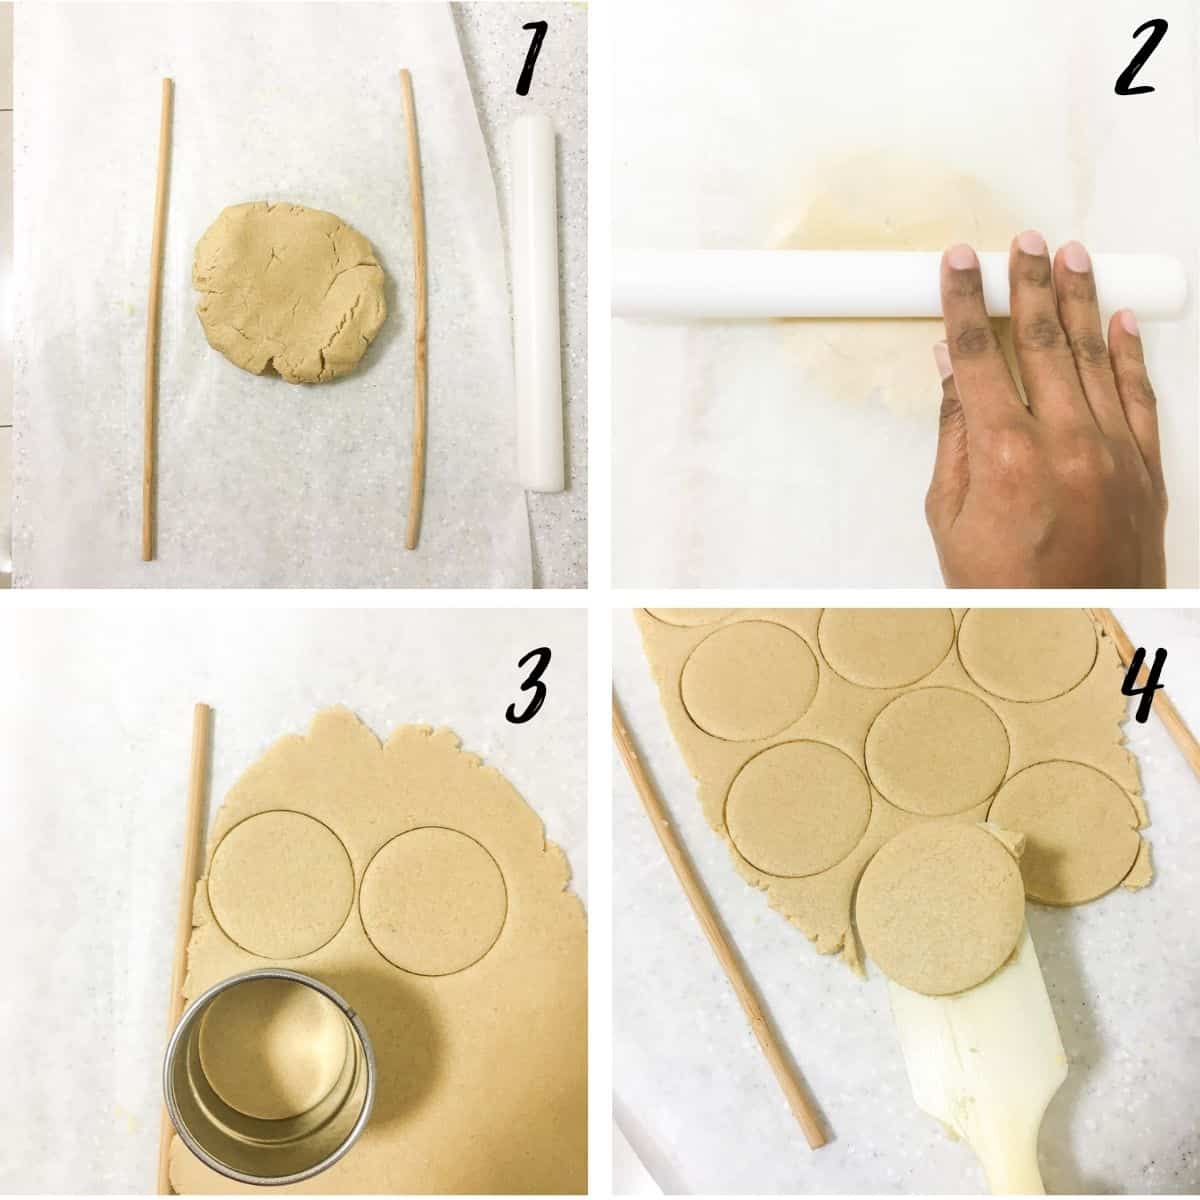 A poster of 4 images showing how to roll and cut a cookie dough into round cookies.